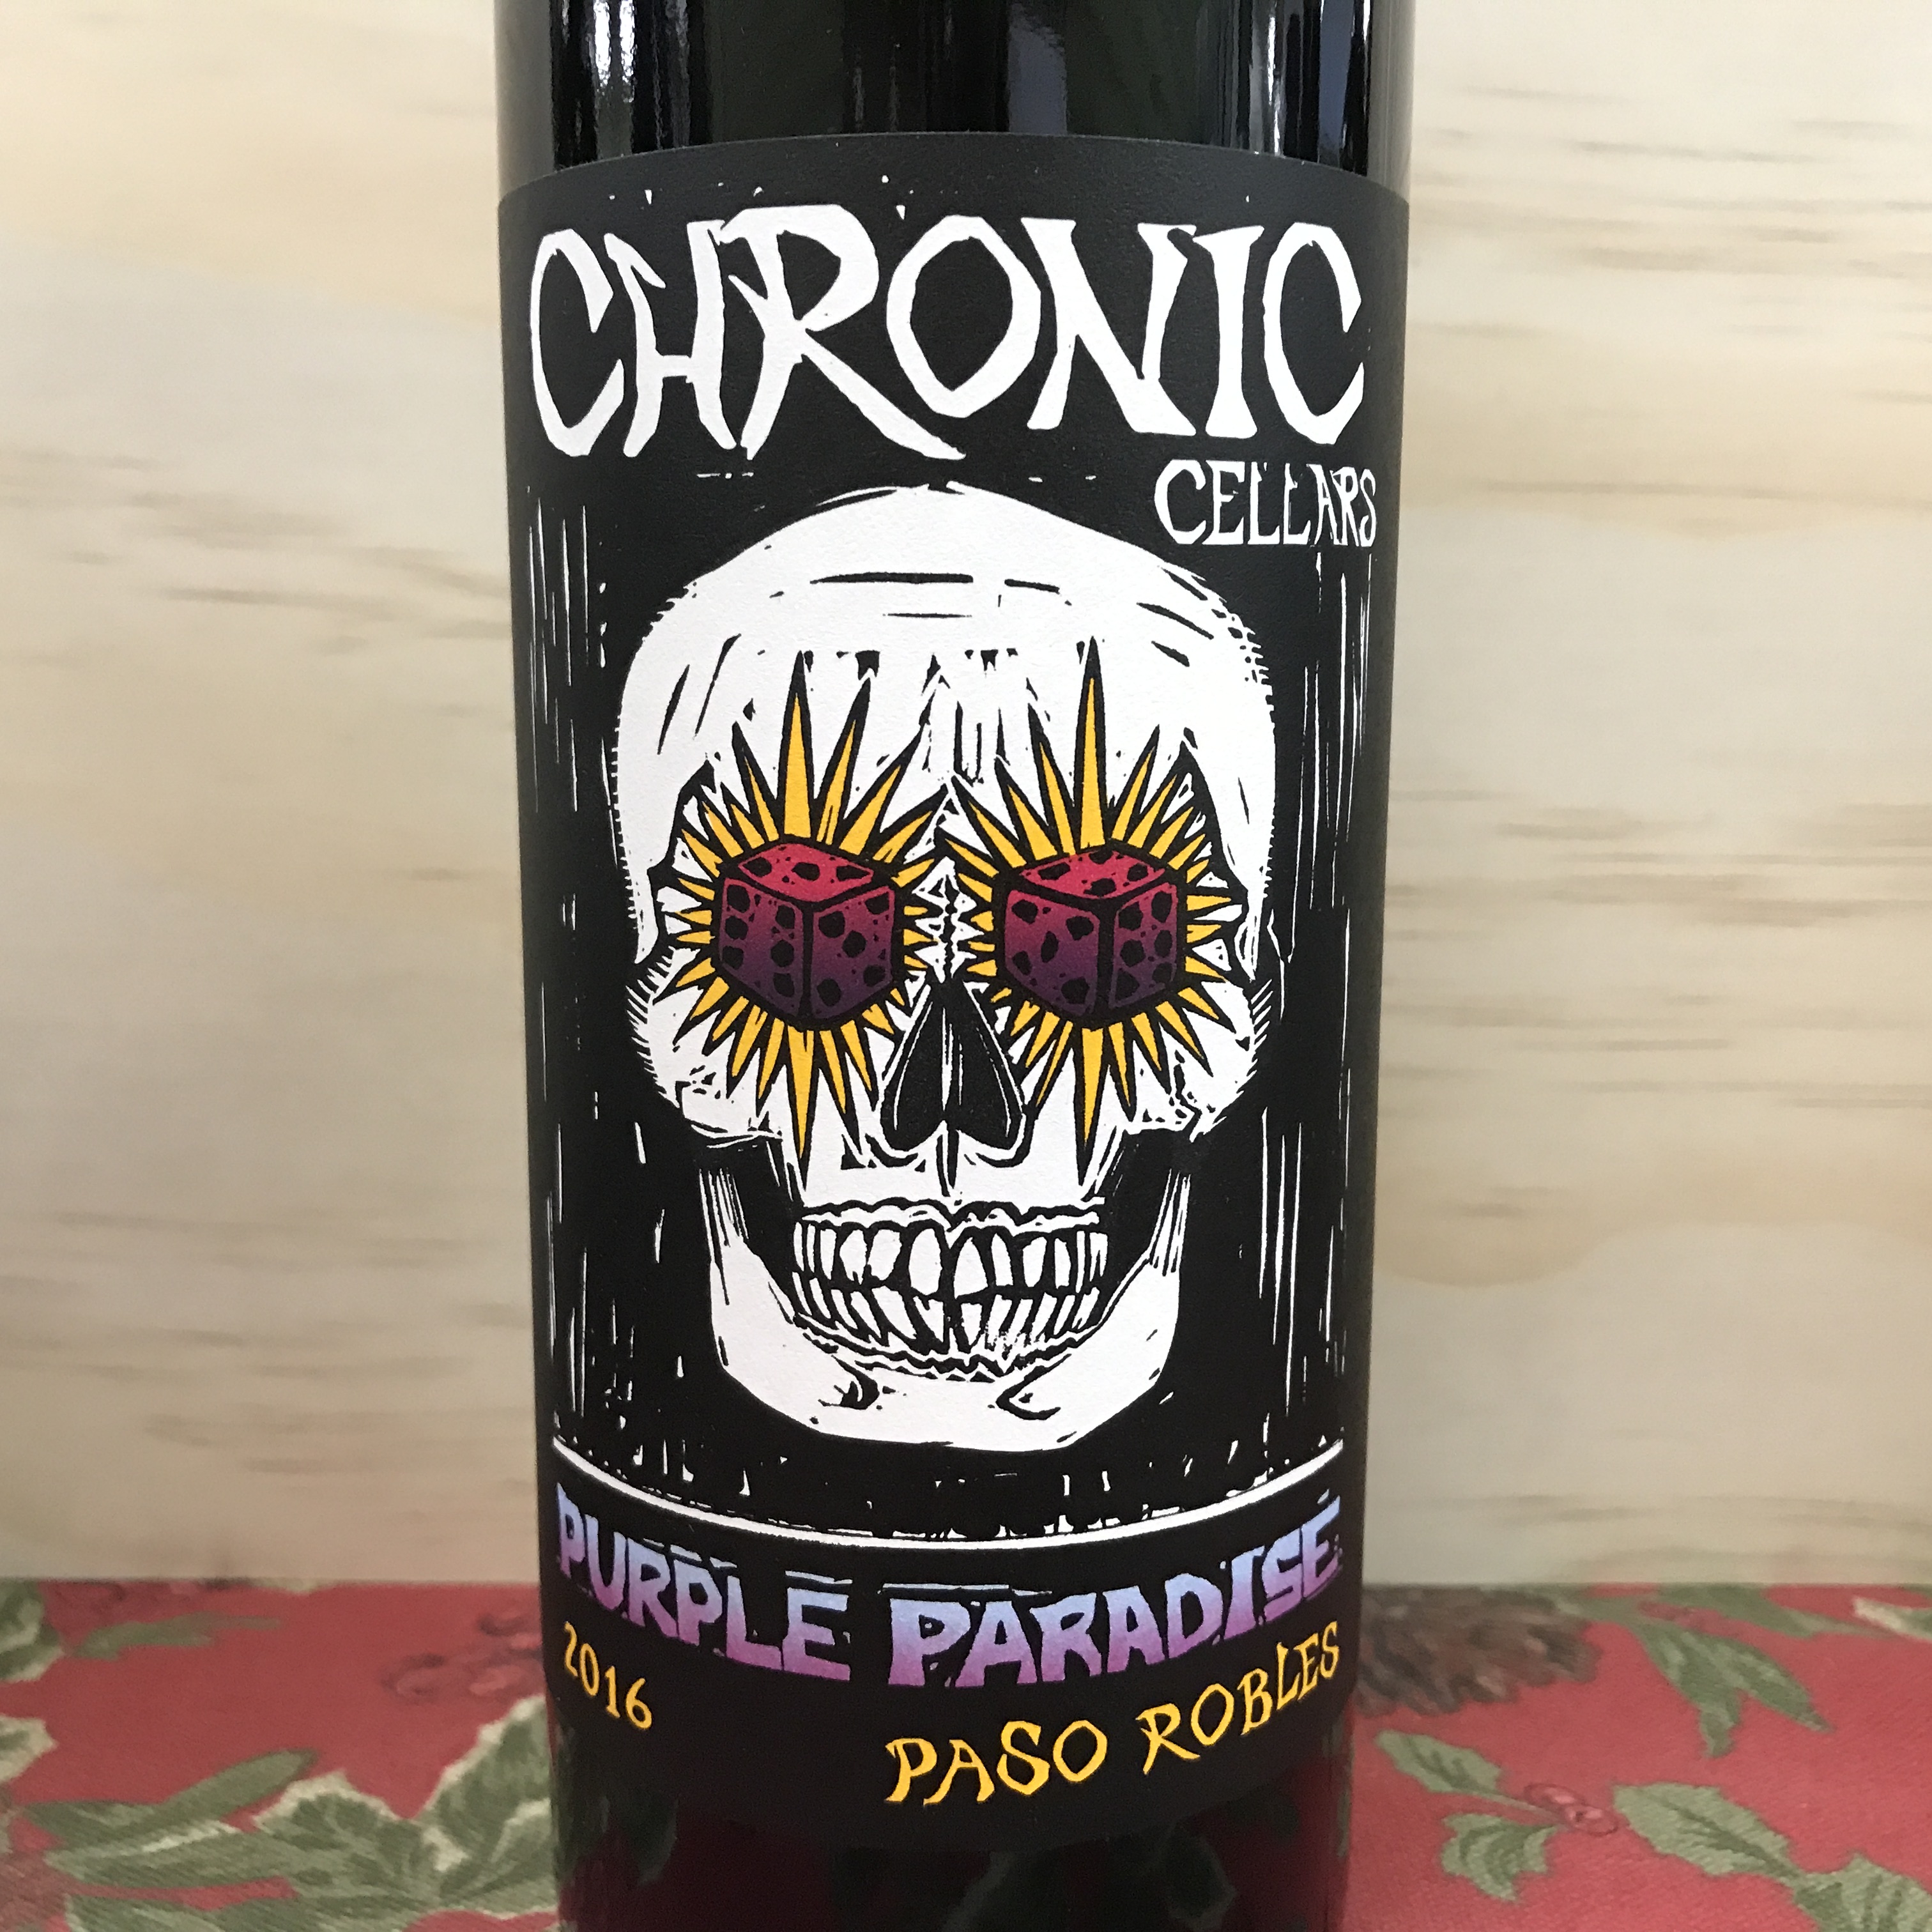 Chronic Cellars Purple Paradise Red blend Paso Robles 2016